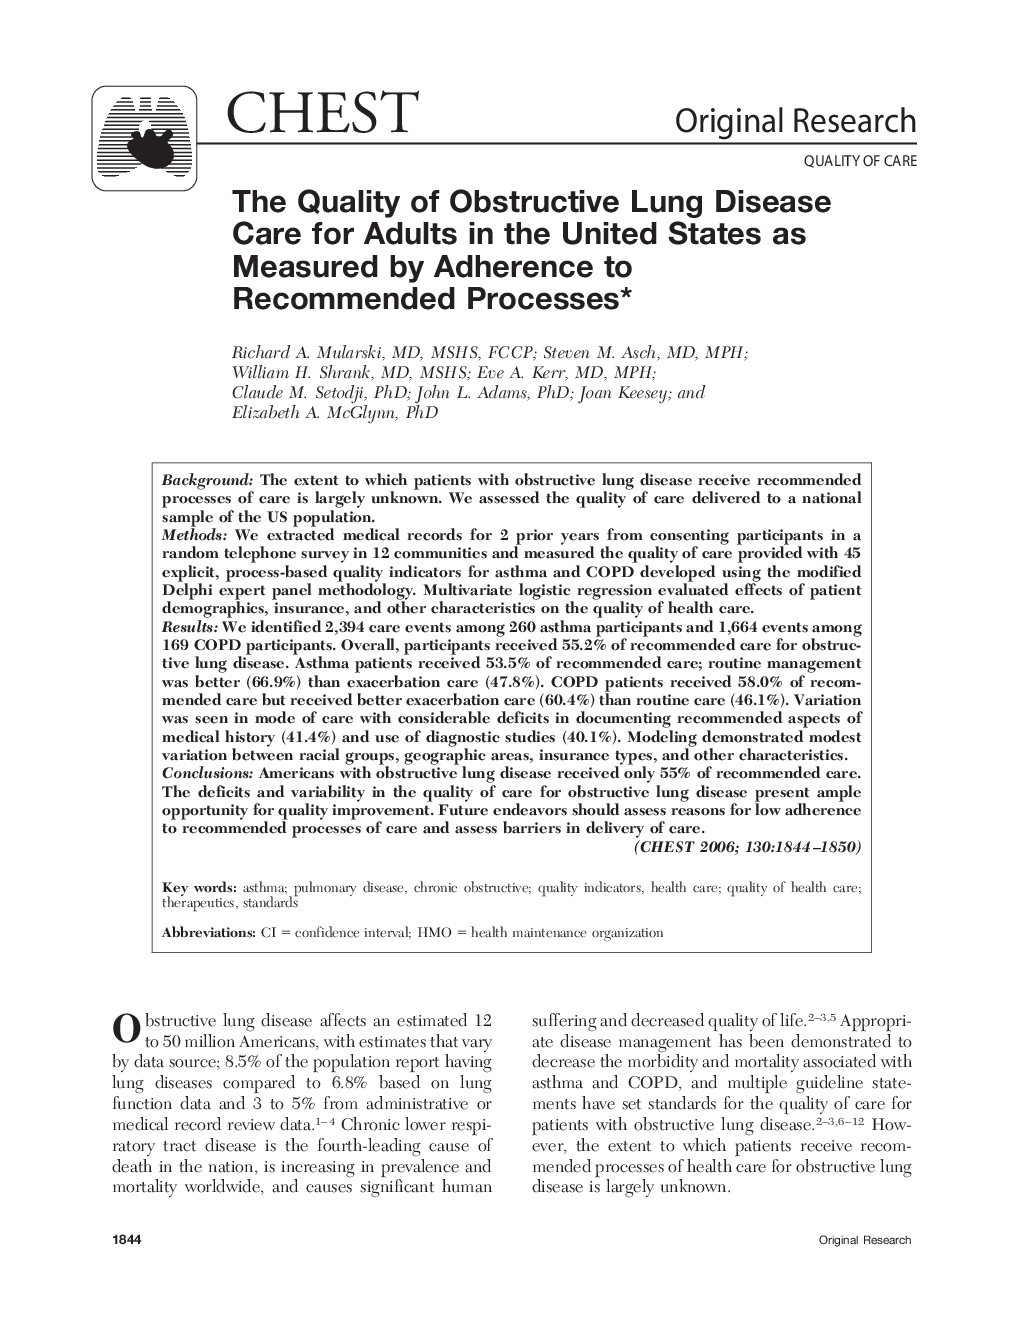 The Quality of Obstructive Lung Disease Care for Adults in the United States as Measured by Adherence to Recommended Processes 